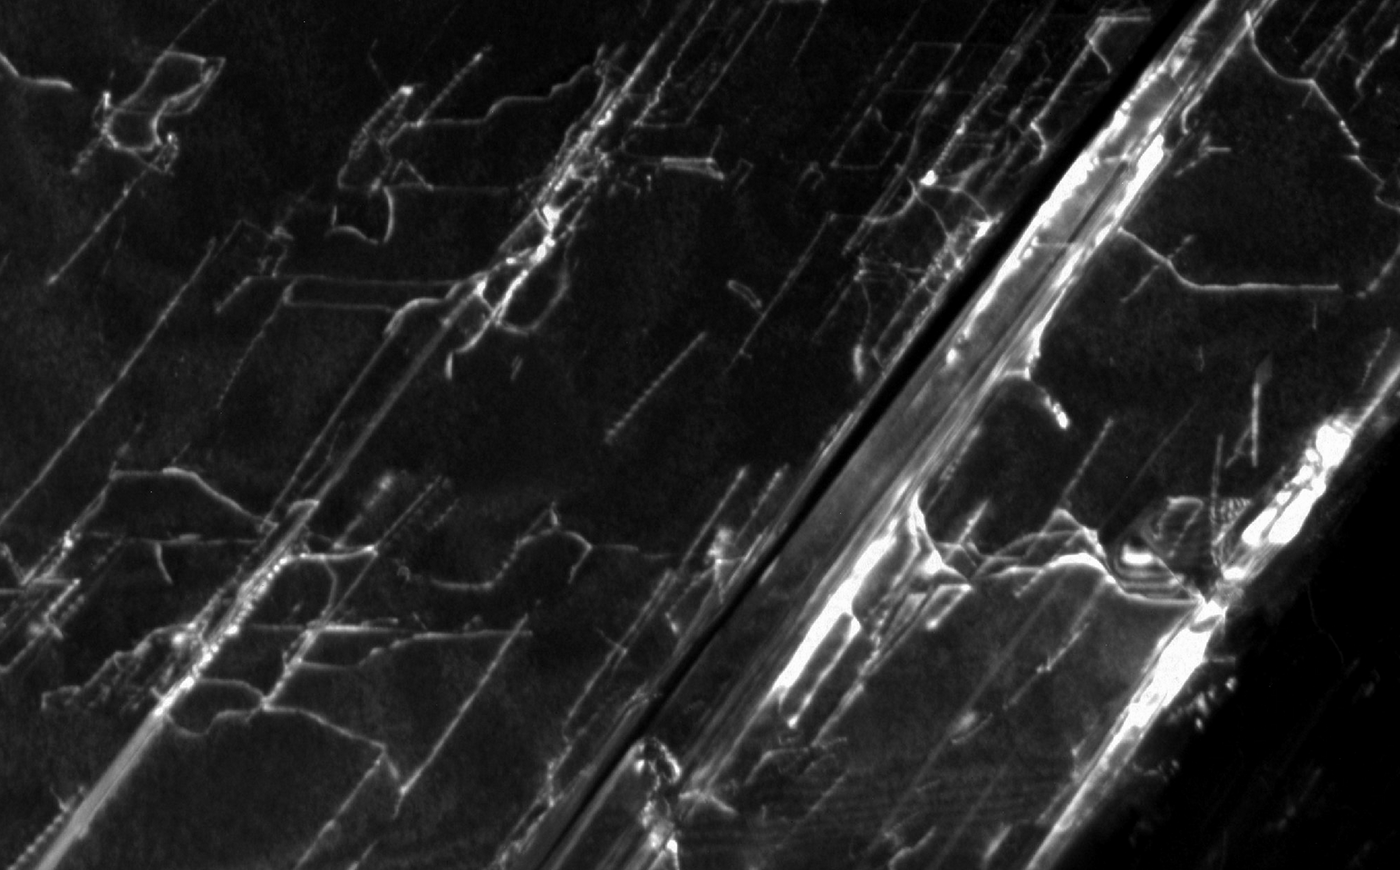 A close-up of the diamond crystal imaged with transmission electron microscopy.